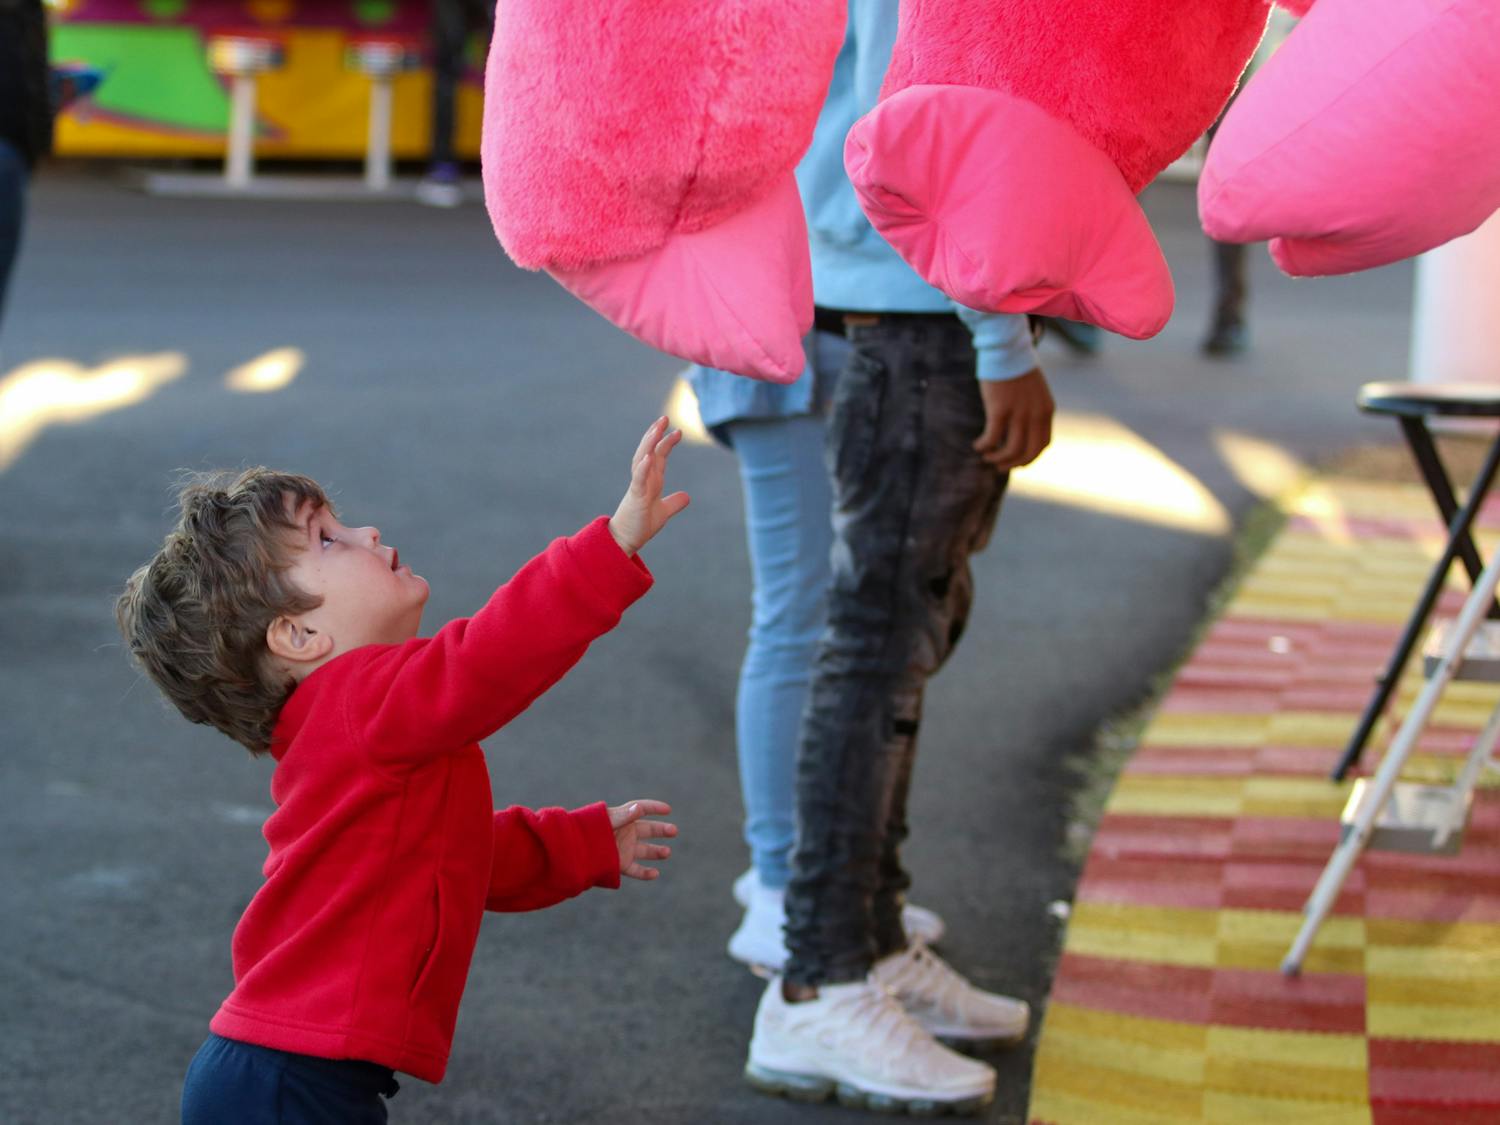 A young boy reaches for a giant pink gorilla hanging outside one of the many carnival games featured at the South Carolina State Fair on Oct. 21, 2022. The water ballon popping game awards animal and popular culture themed prizes to individuals who can win the game.